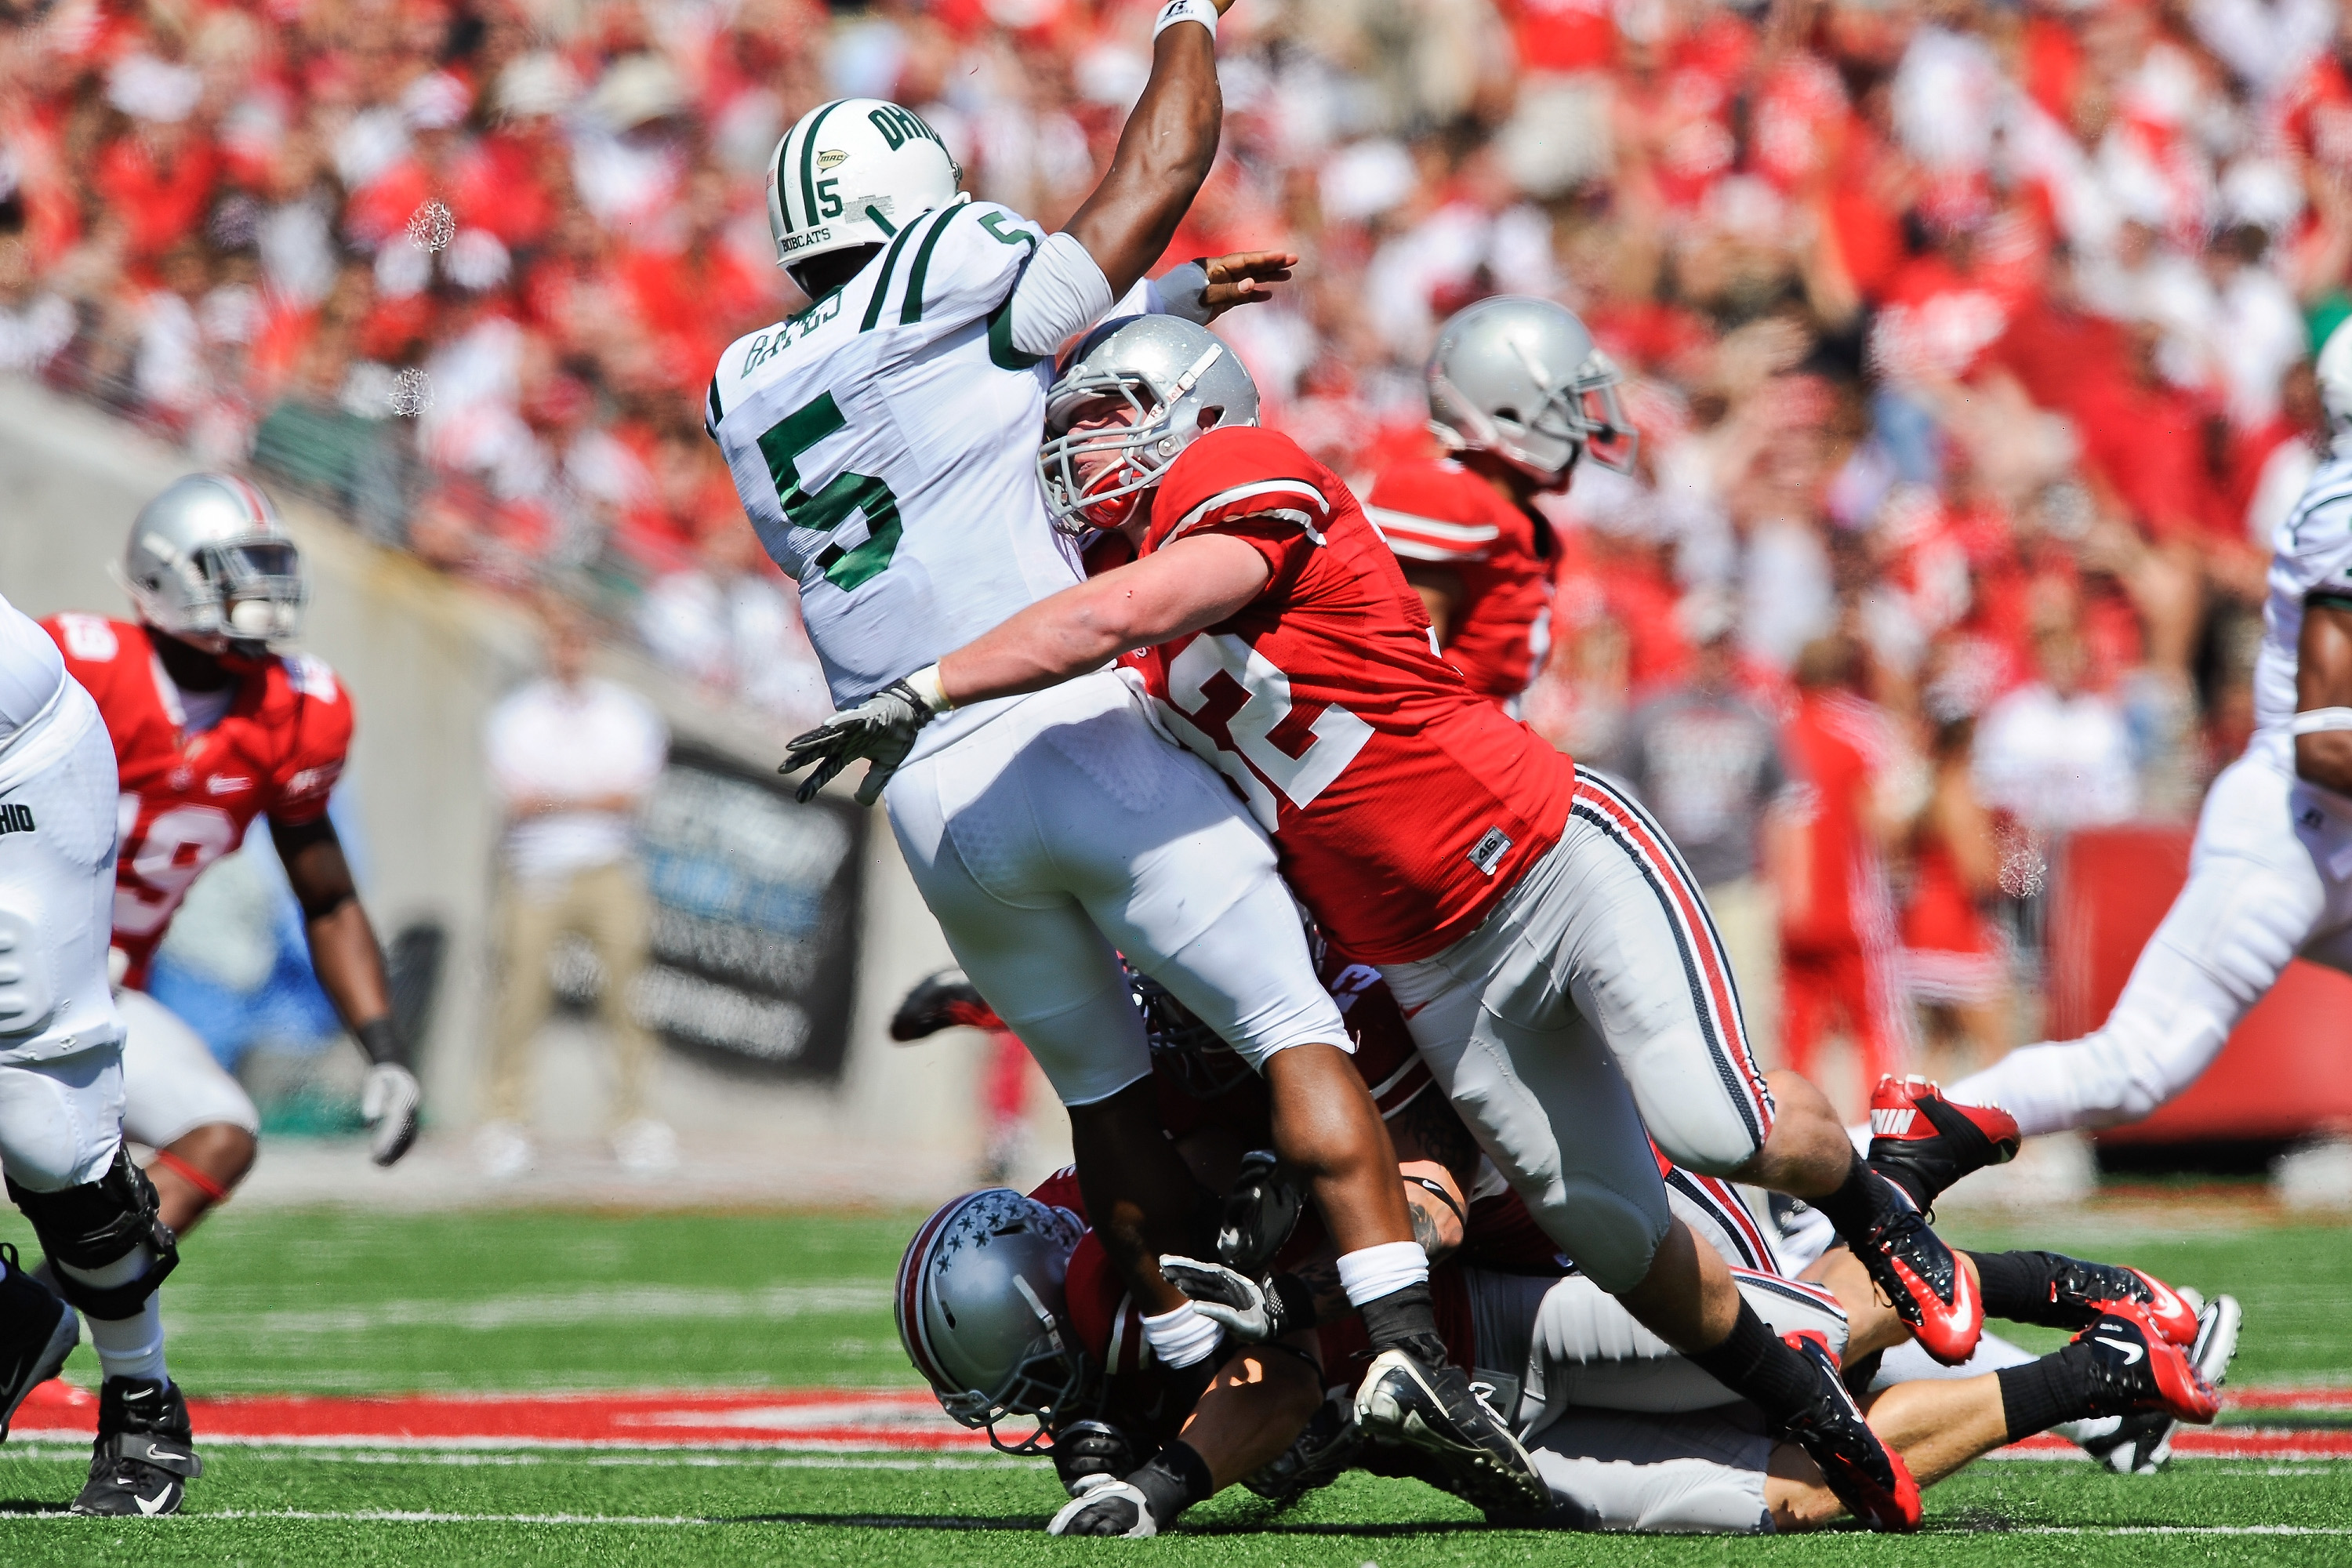 COLUMBUS, OH - SEPTEMBER 18:  Storm Klein #32 of the Ohio State Buckeyes hits quarterback Phil Bates #5 of the Ohio Bobcats right after Bates releases the ball at Ohio Stadium on September 18, 2010 in Columbus, Ohio.  (Photo by Jamie Sabau/Getty Images)